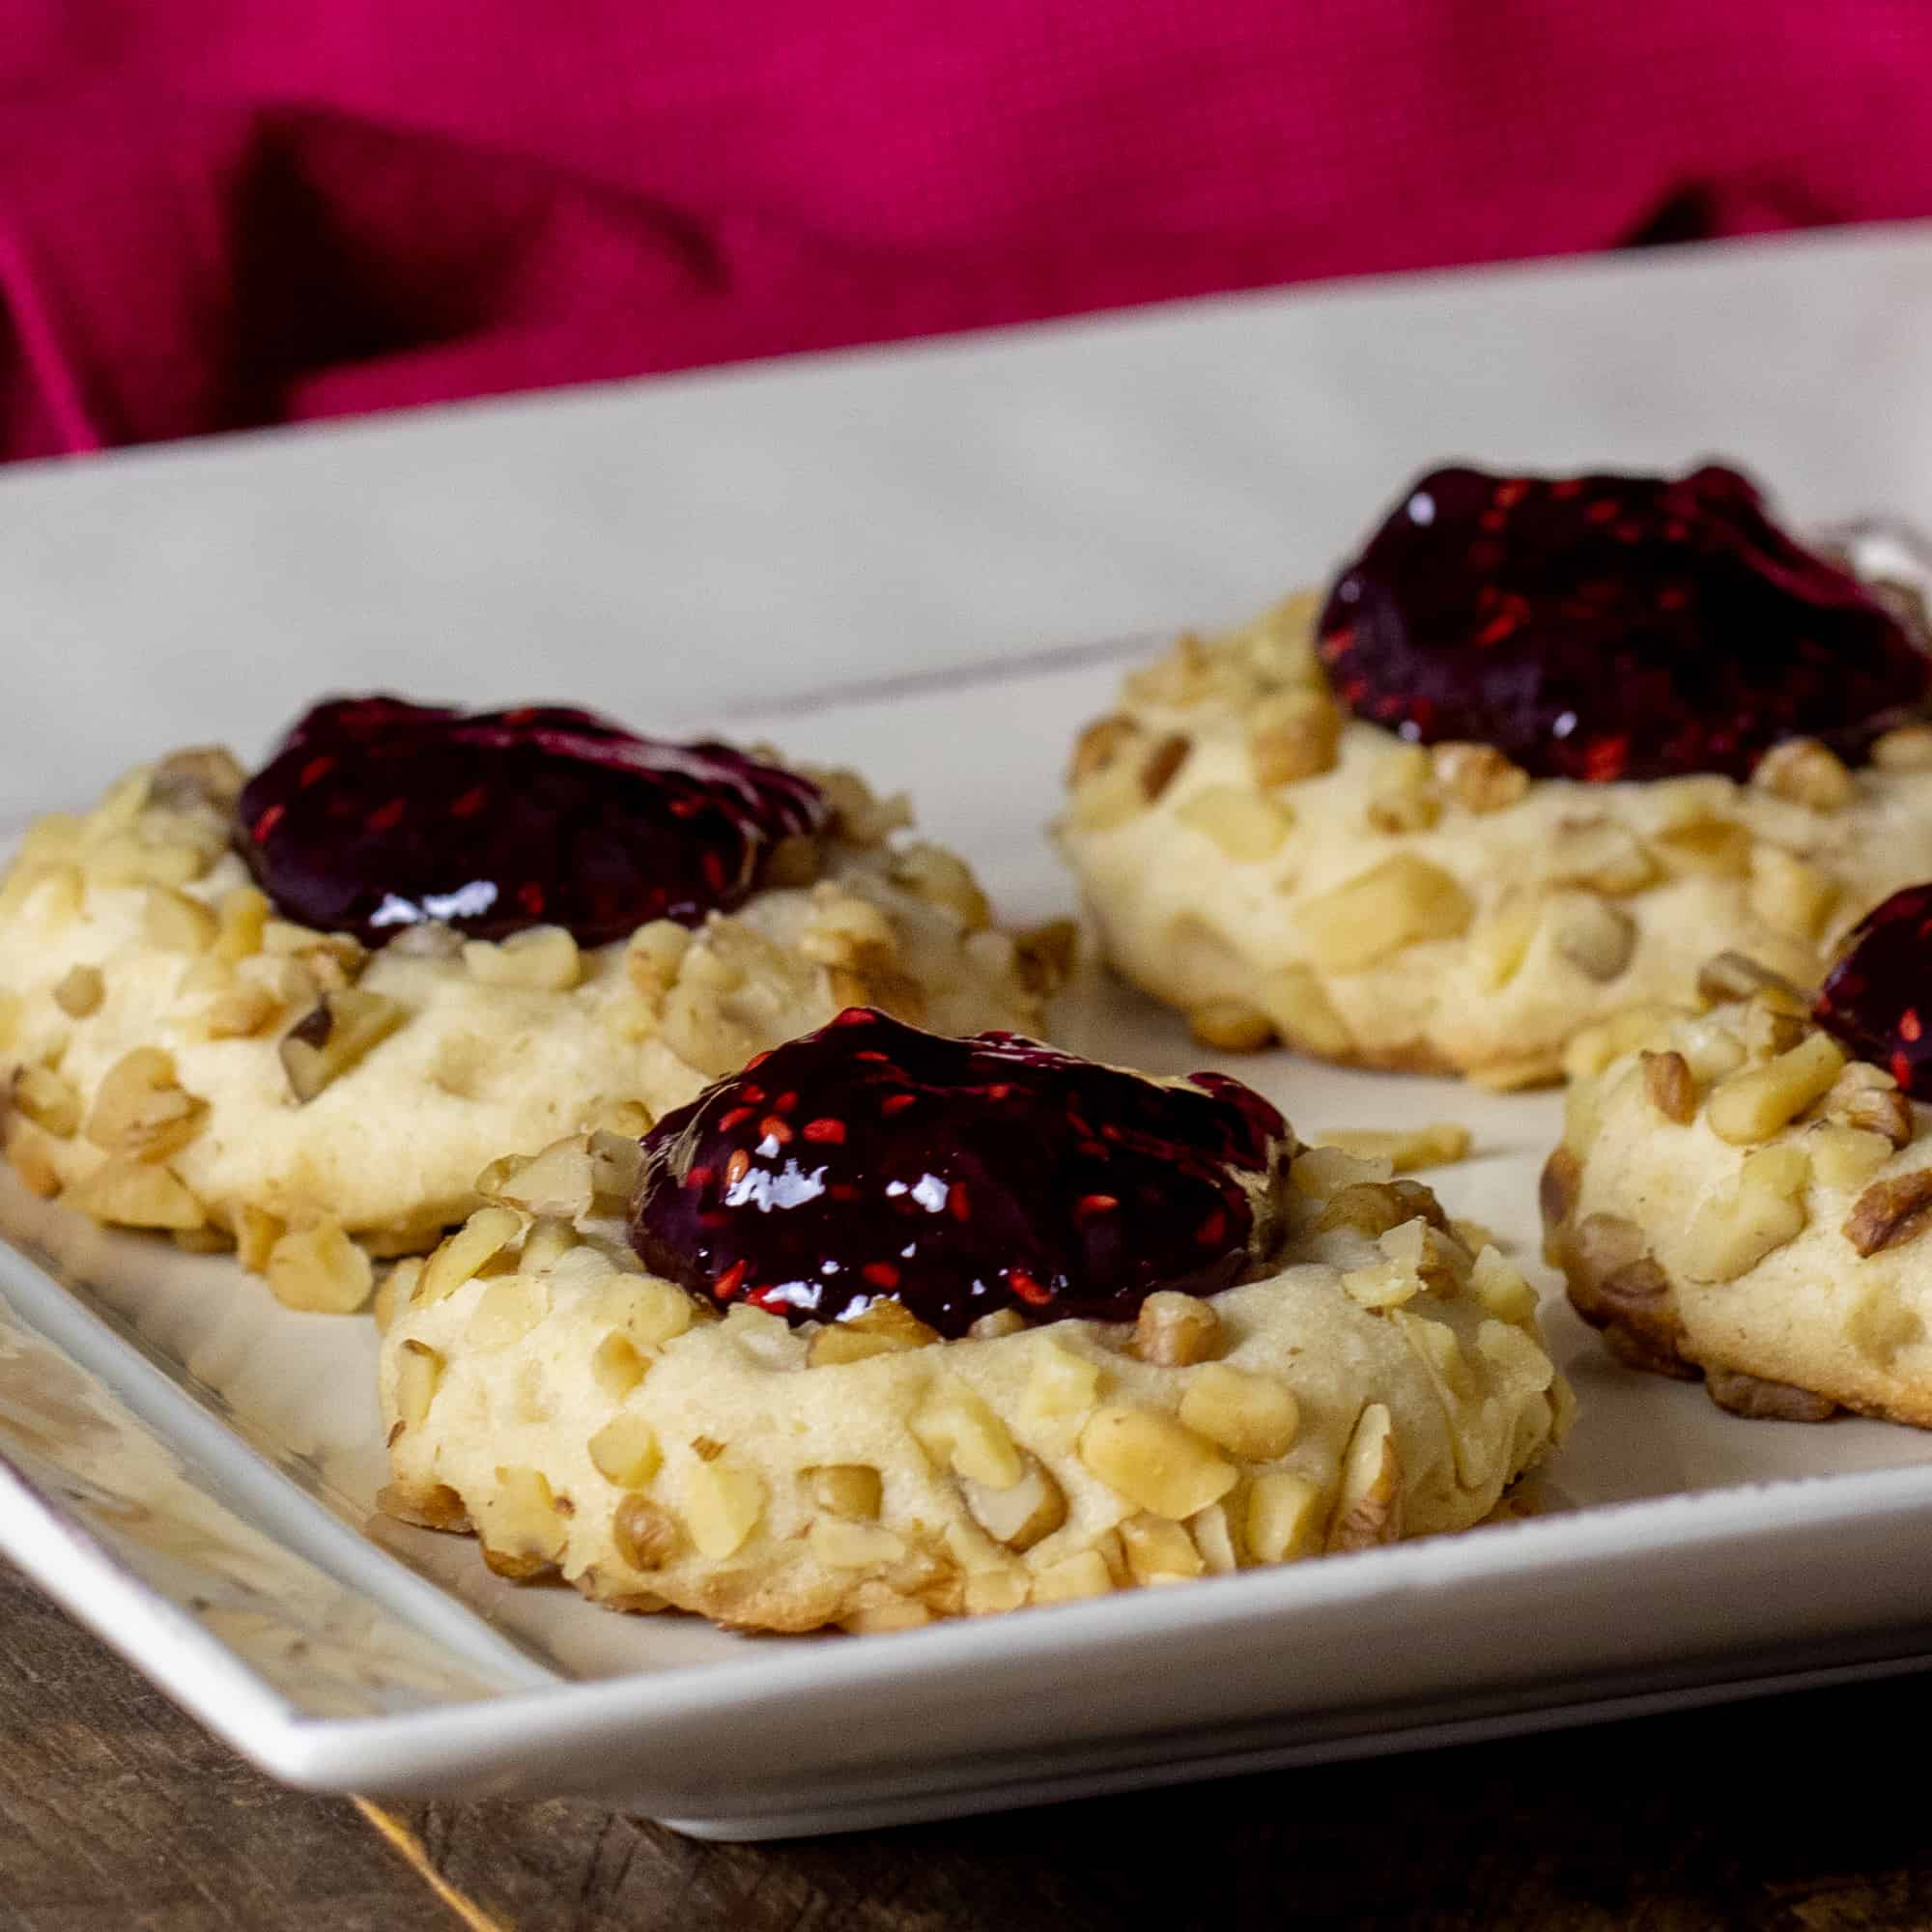 Four raspberry thumbprint cookies on a plate